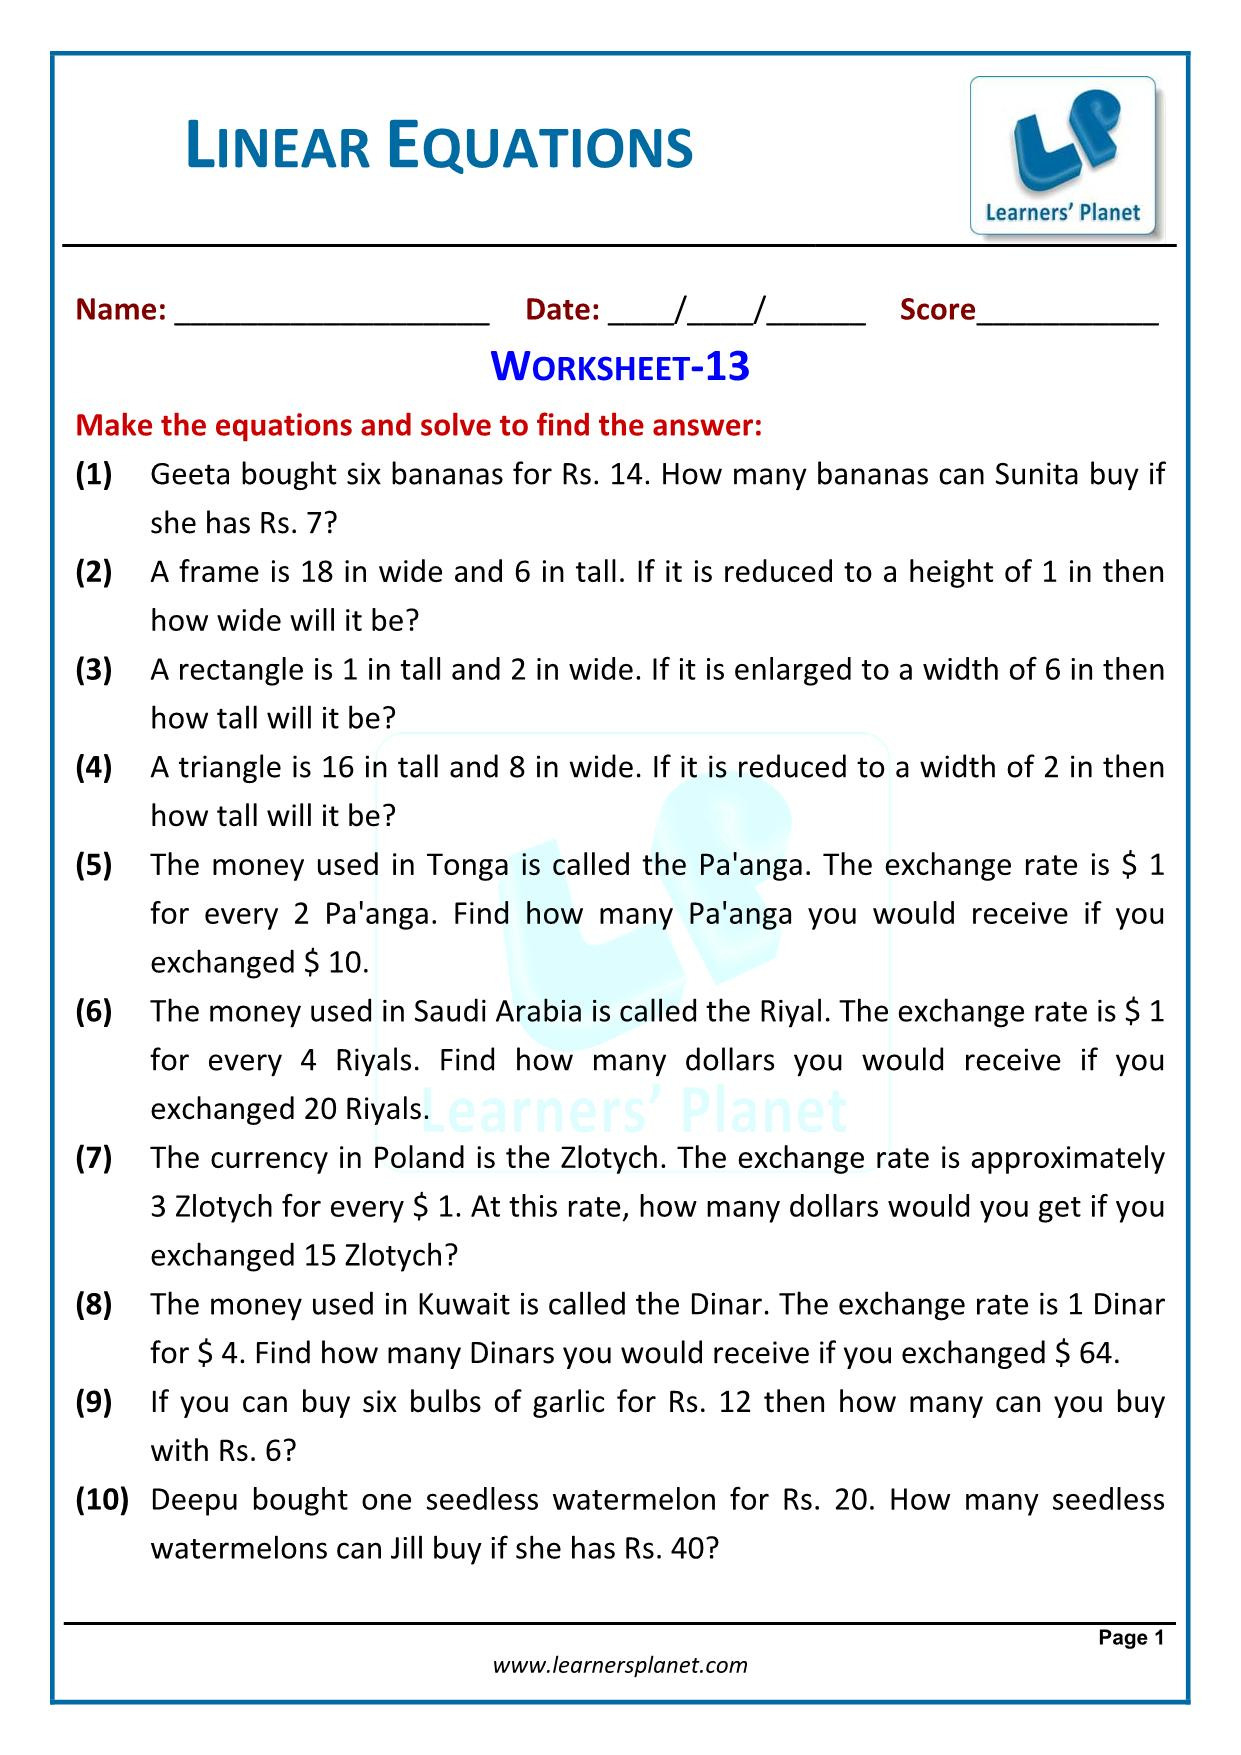 Worksheet For Linear Equations In One Variable Class 7 Maths